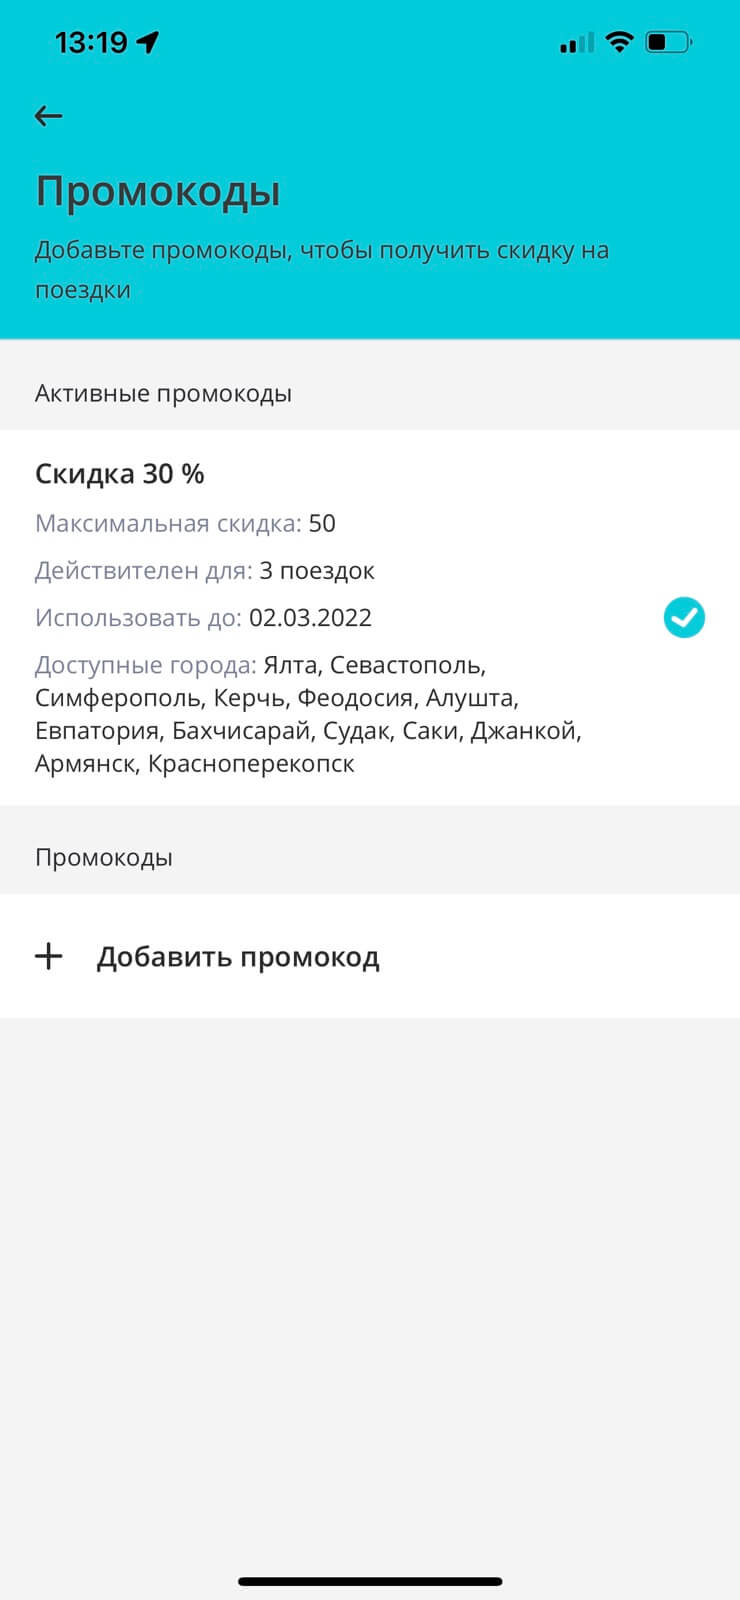 Activate Promo code for СОЛНЫШКО app - Image 4